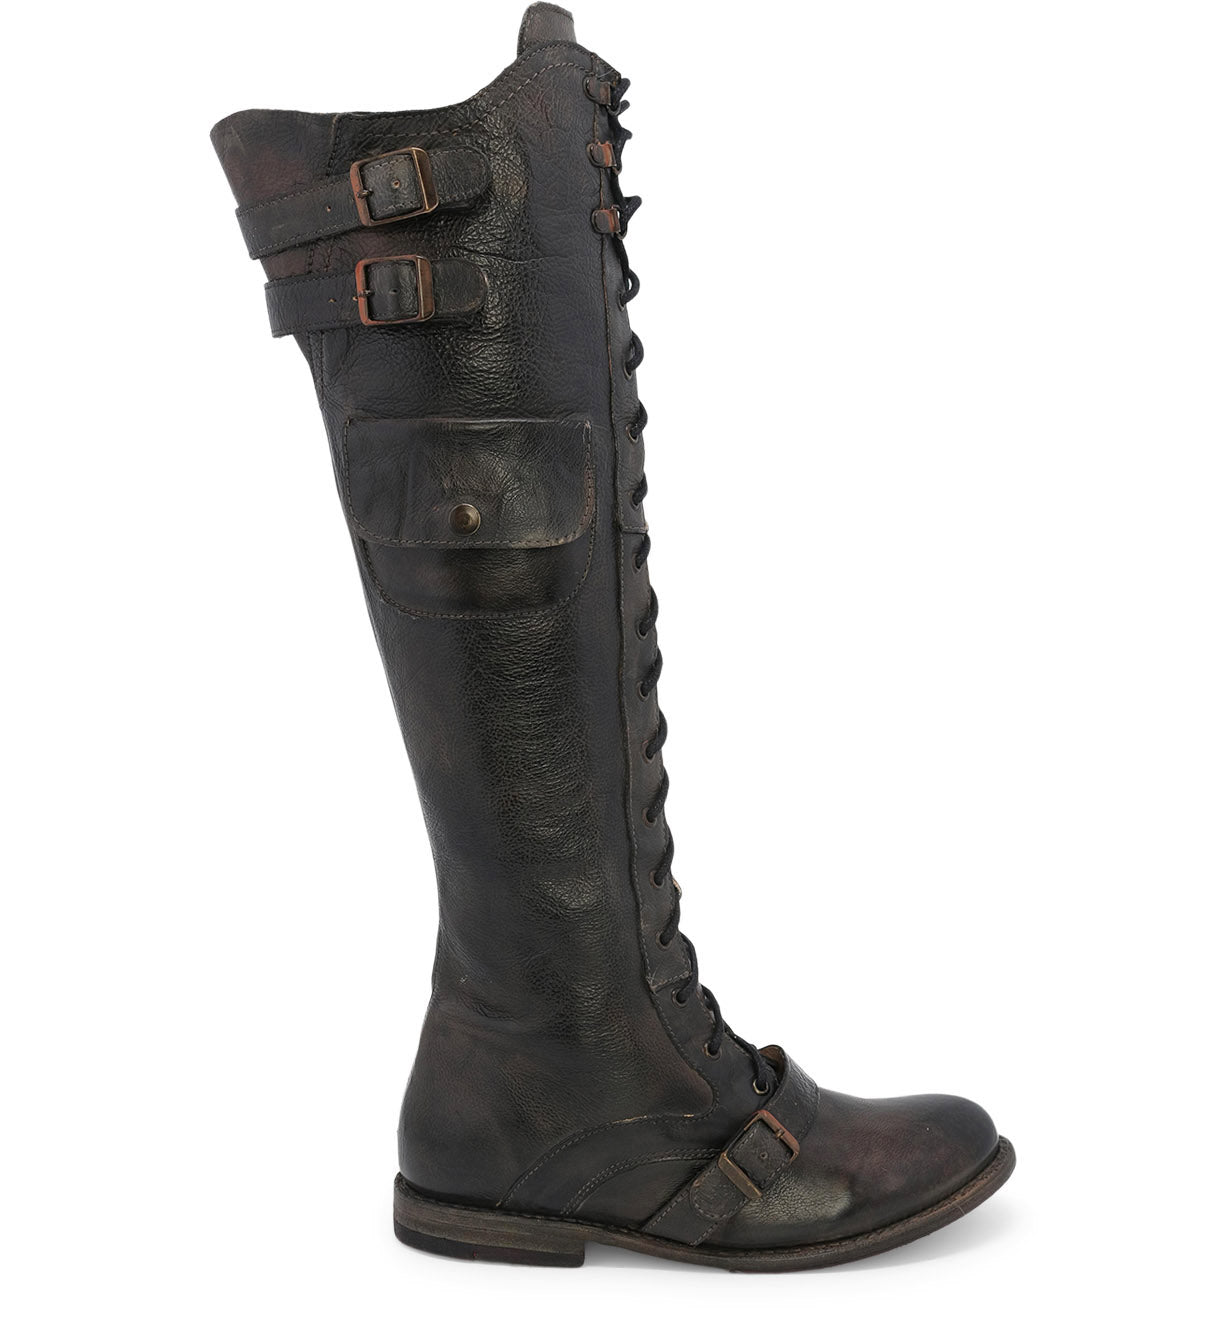 A women's black leather Oak Tree Farms Meryl boot with buckles and vegetable tanned leather.